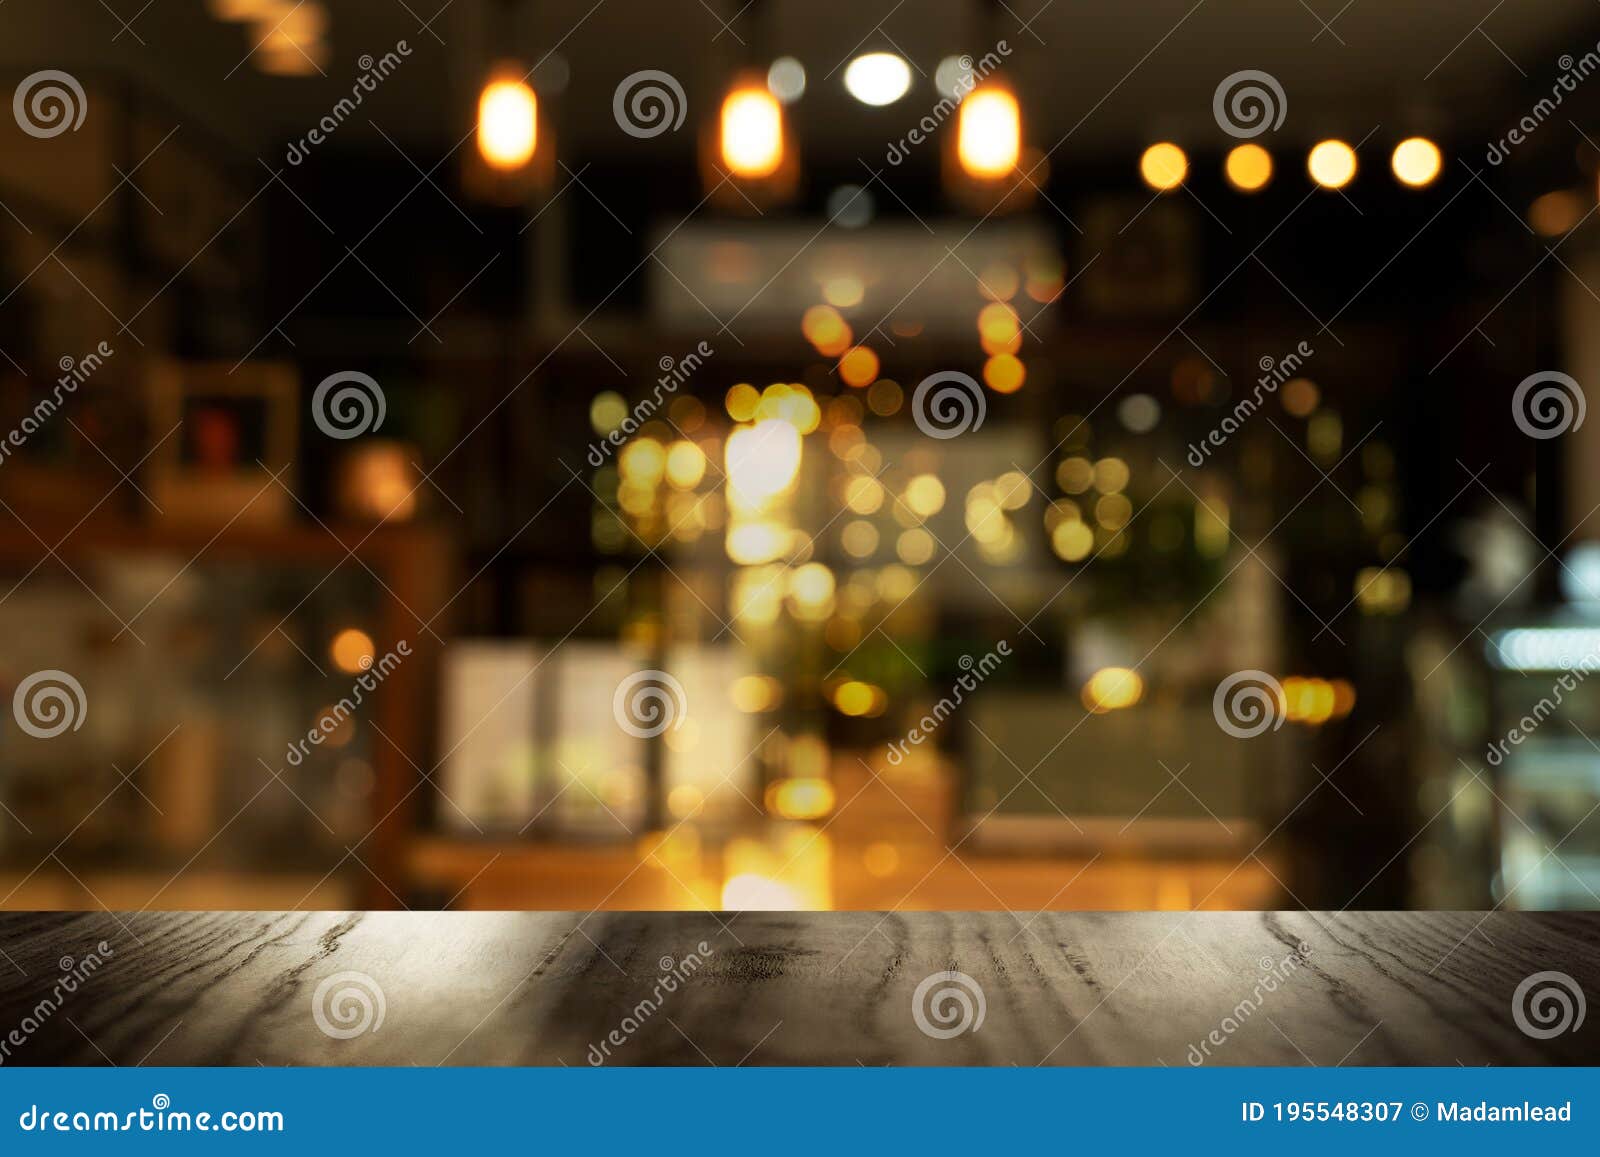 Top of Black Table with Blur Light in Pub or Bar Party Night Life ...